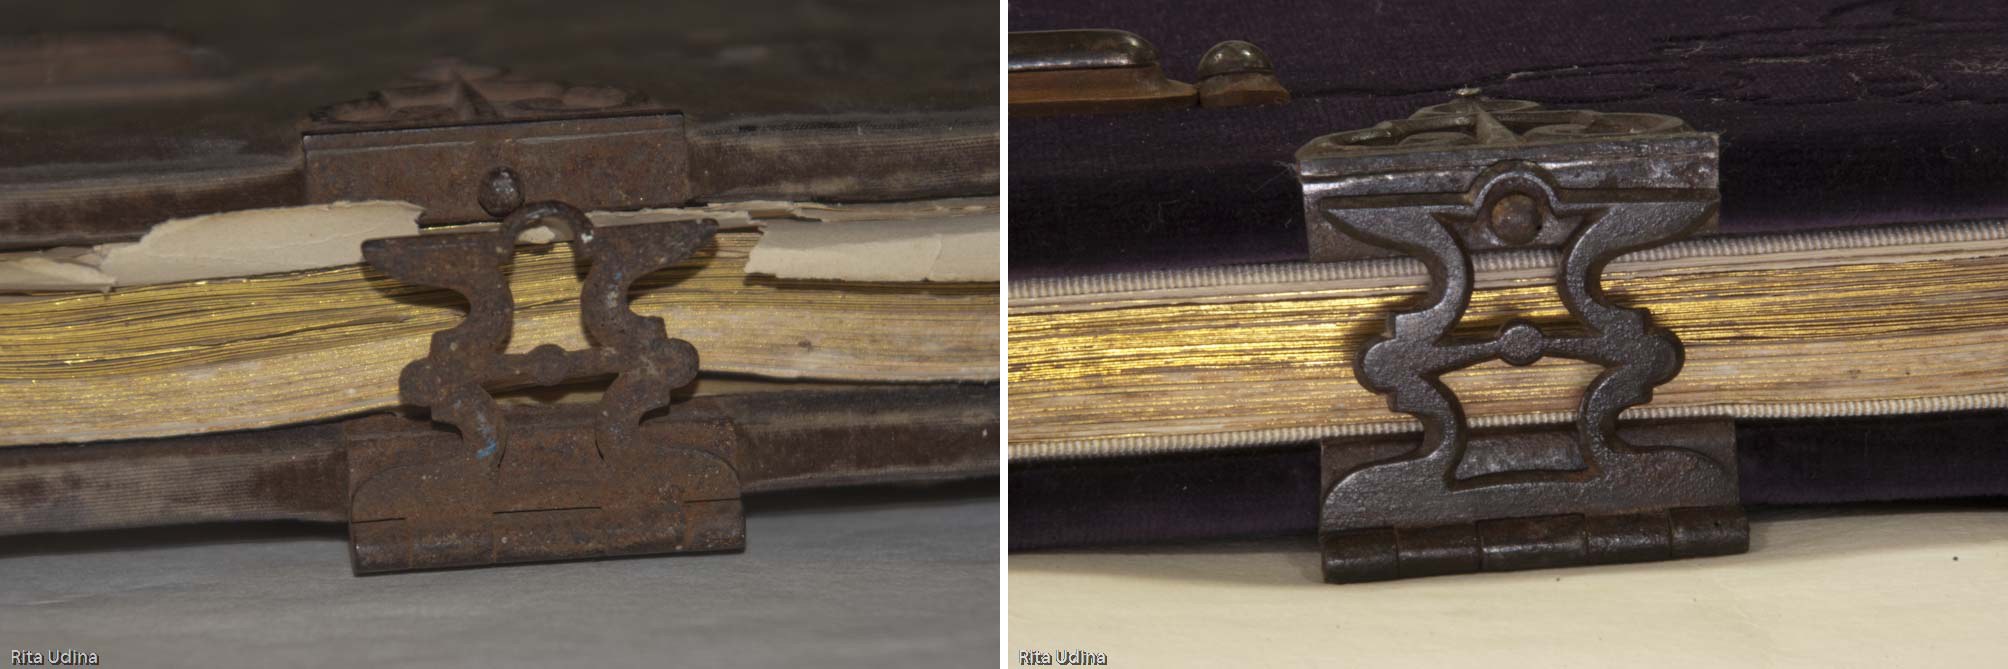 Top lock before (left) and after restoration (right).